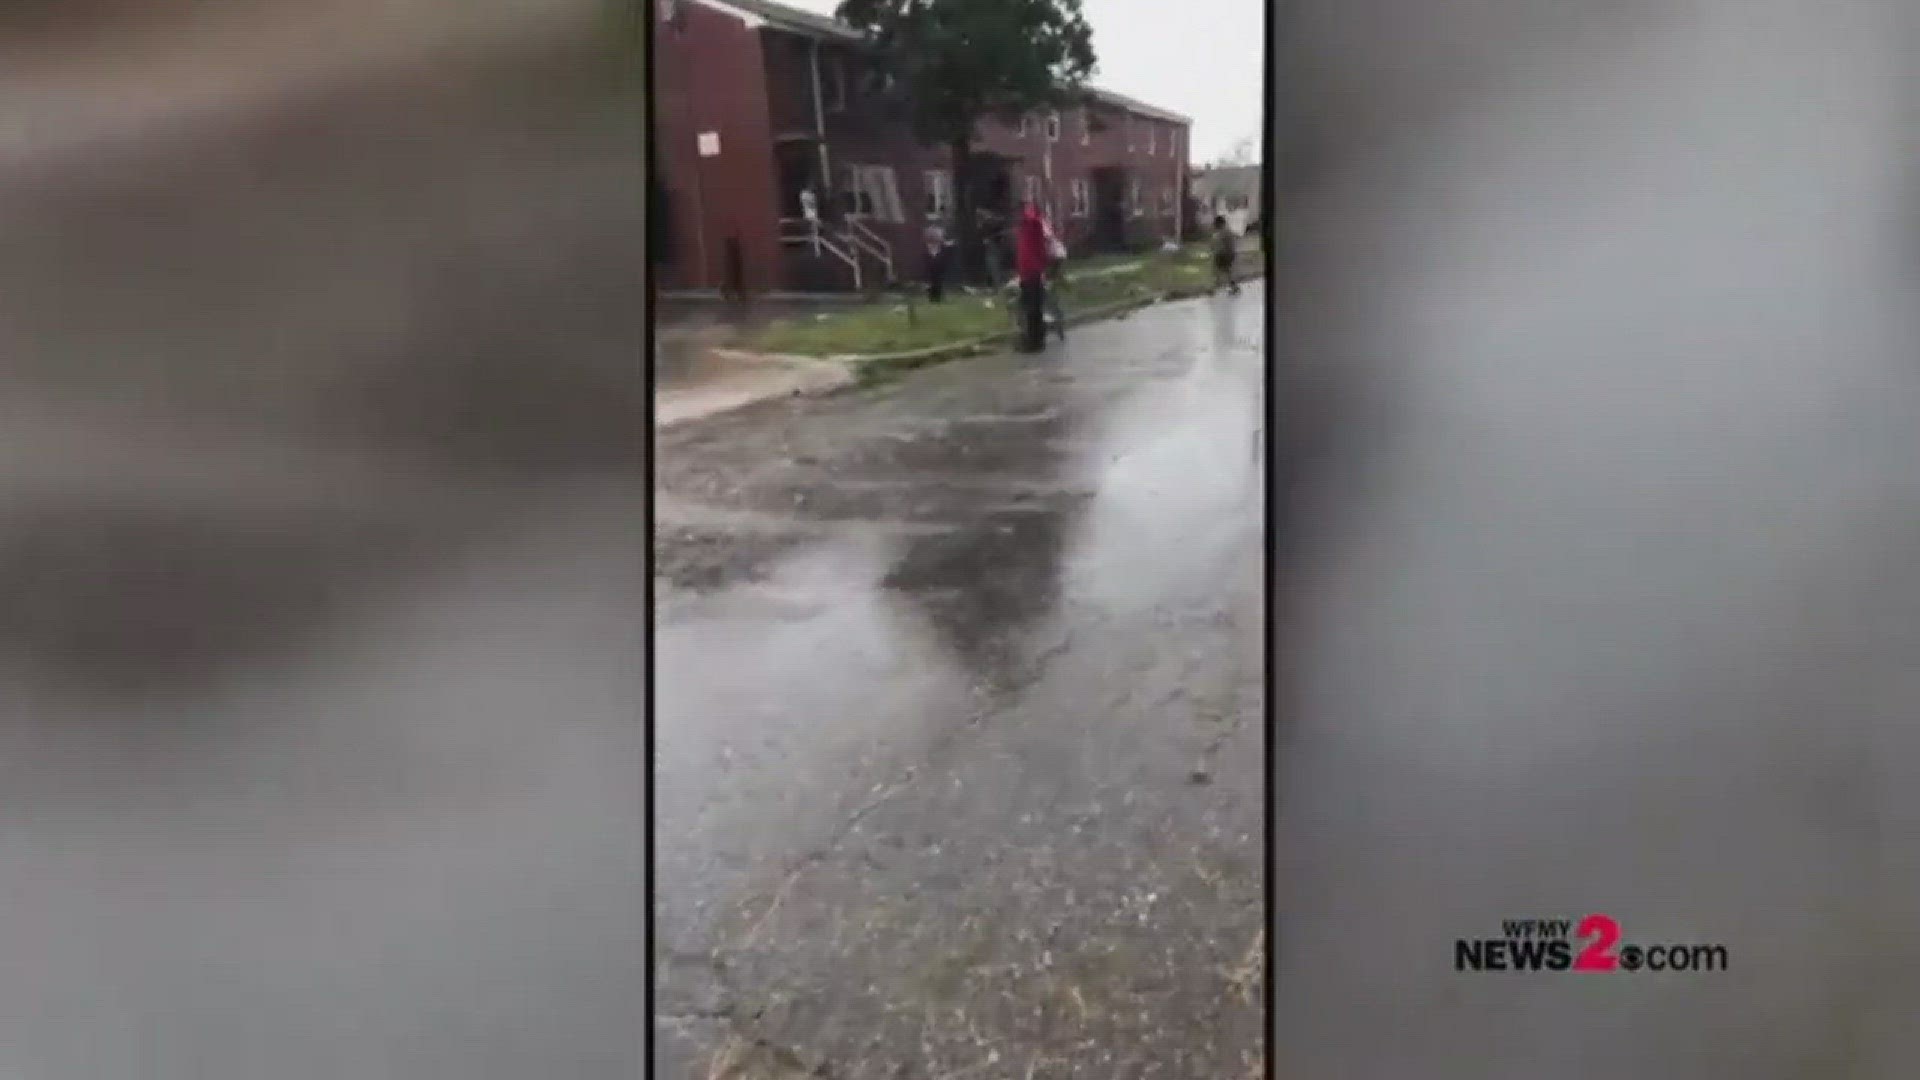 Wilmington PD said they were aware of looting at a Family Dollar in Wilmington after Florence came through the area, but management had asked them not to intervene. | *Warning video contains graphic language*